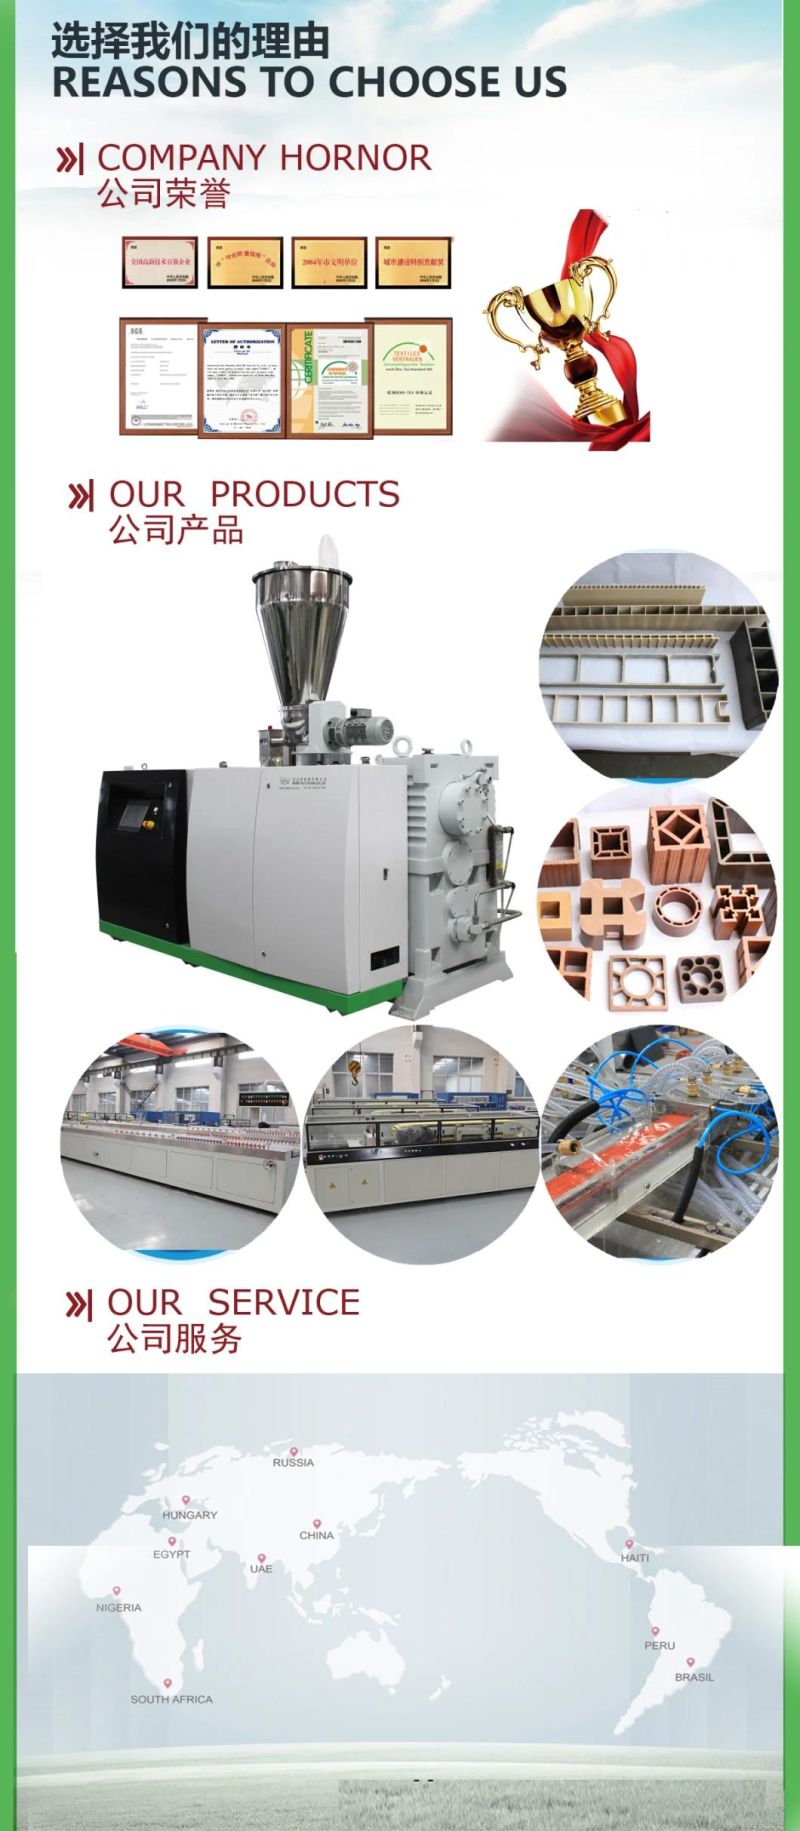 (Midtech Industry) Plastic Foaming PE/HDPE Fishing Raft Profile Board Extrusion/Extruder Making Machinery